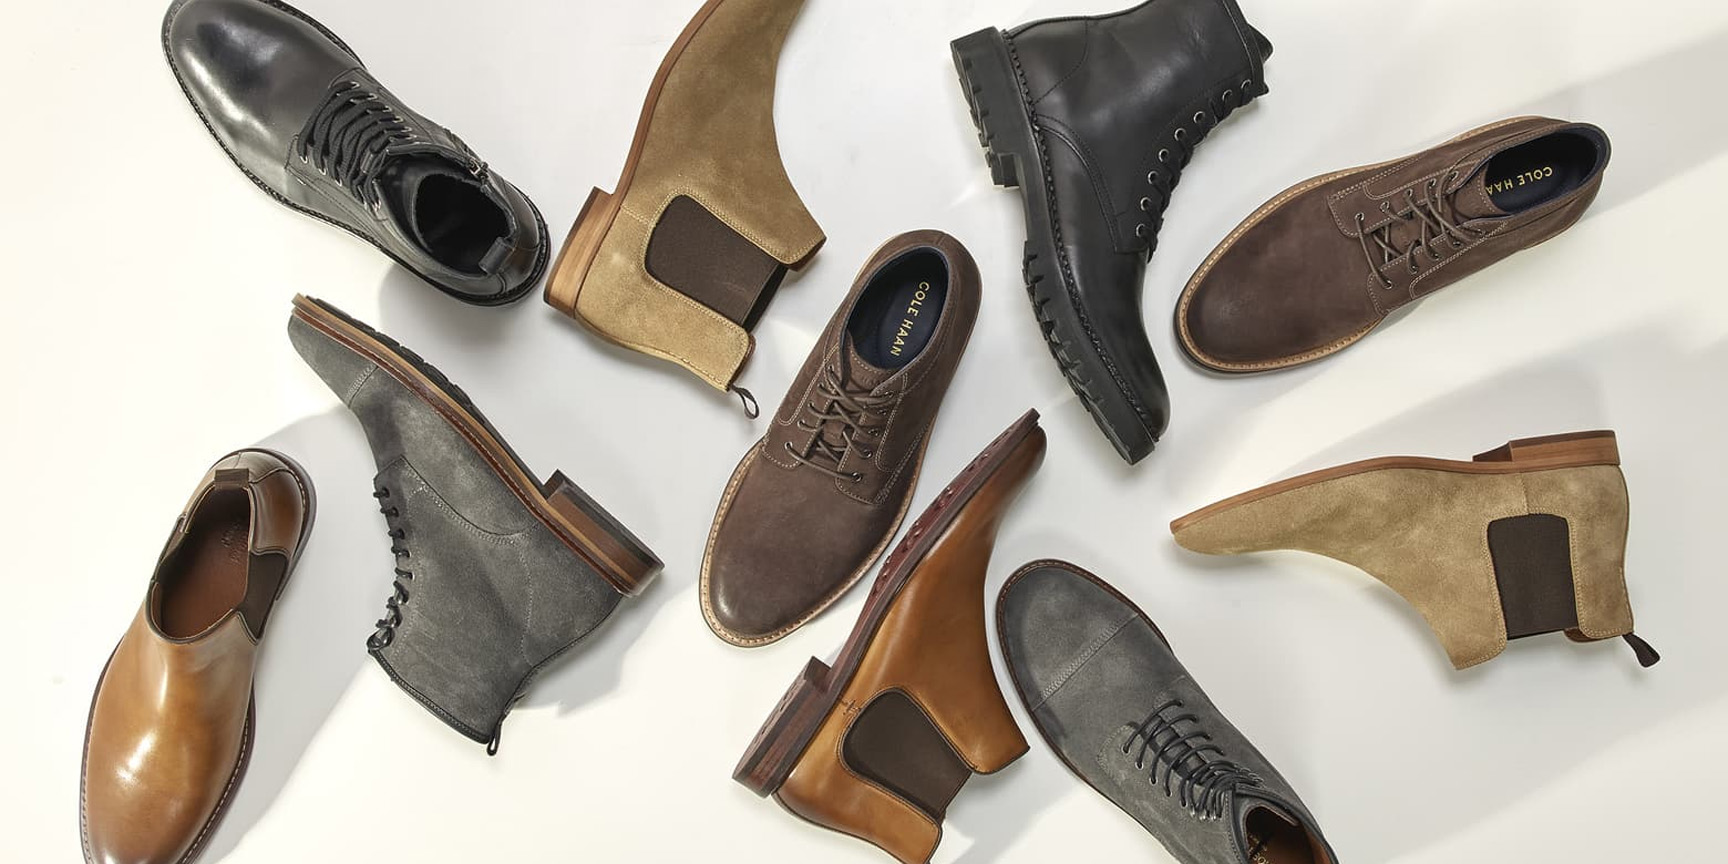 Råd Samuel Tarmfunktion DSW takes extra 30% off all boots: Steve Madden, Cole Haan, Clarks, more